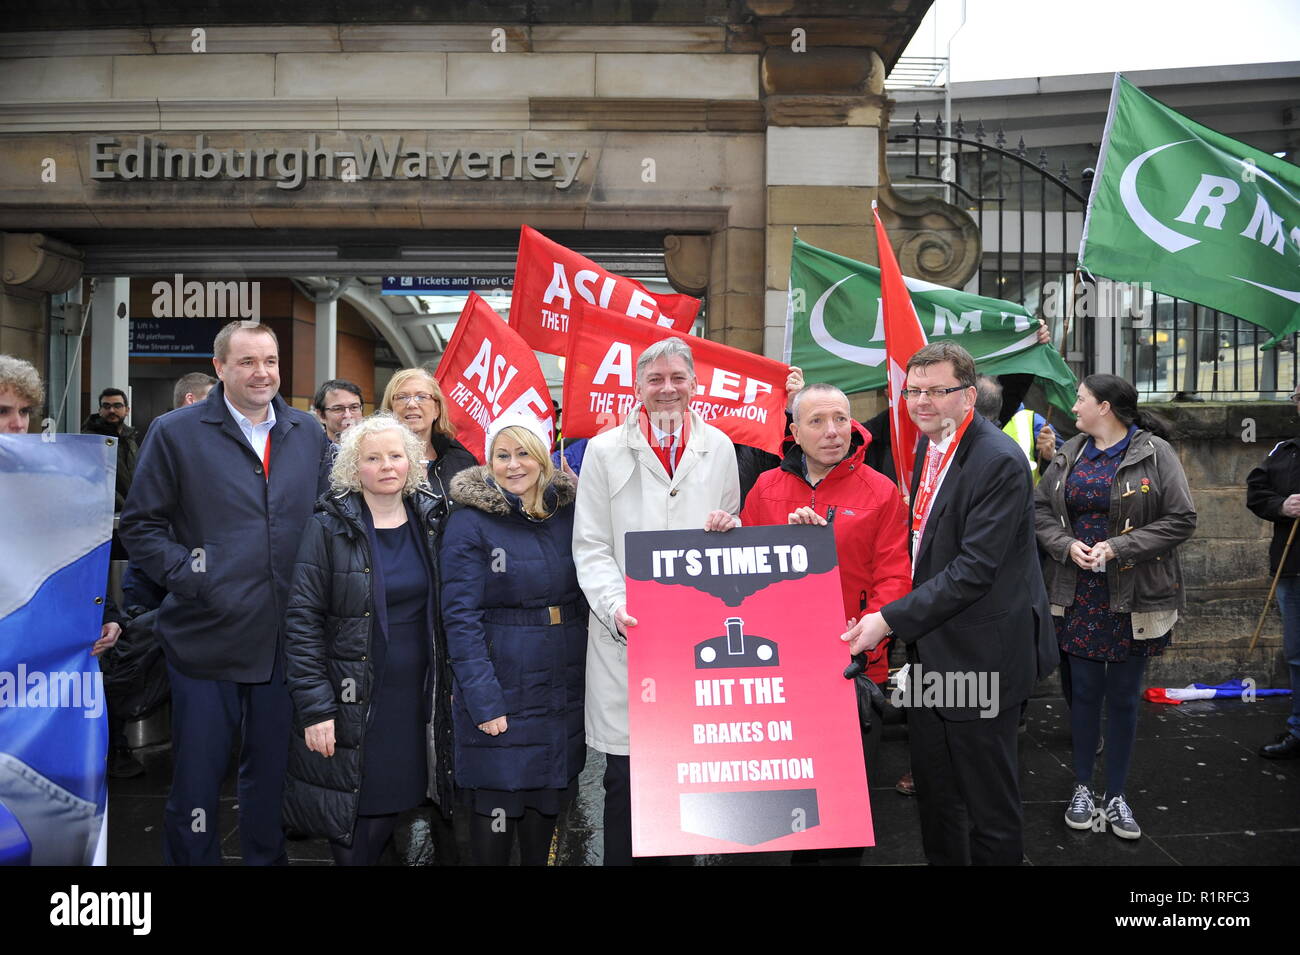 Edinburgh, UK. 14th Nov, 2018. Ahead of a Holyrood vote calling for the ScotRail break clause to be exercised, Scottish Labour leader Richard Leonard and Transport spokesperson Colin Smyth campaign at Waverley station. Credit: Colin Fisher/Alamy Live News Stock Photo